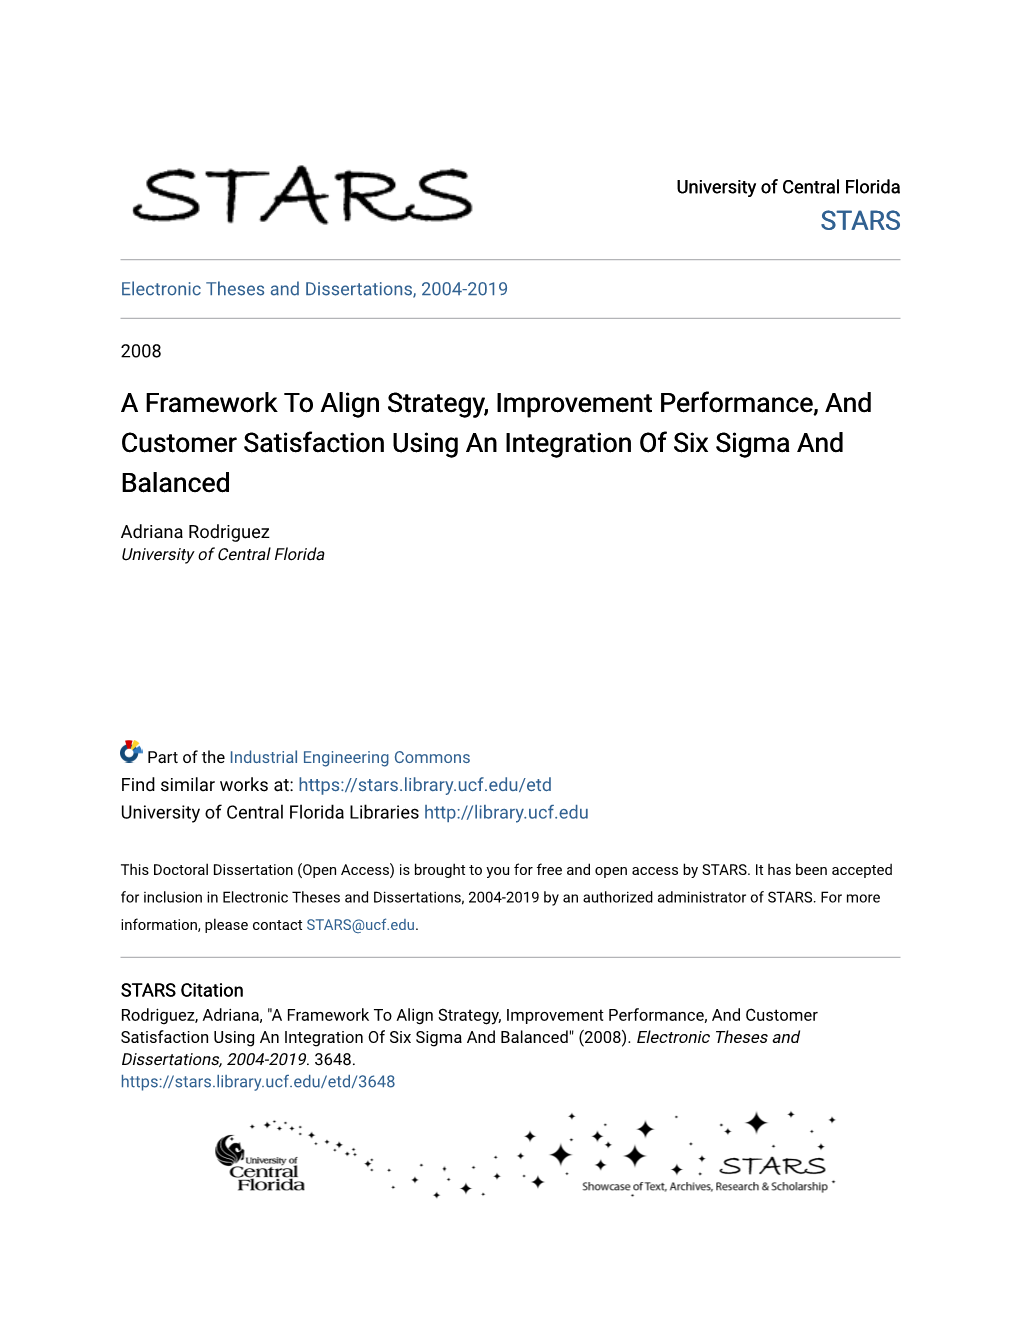 A Framework to Align Strategy, Improvement Performance, and Customer Satisfaction Using an Integration of Six Sigma and Balanced